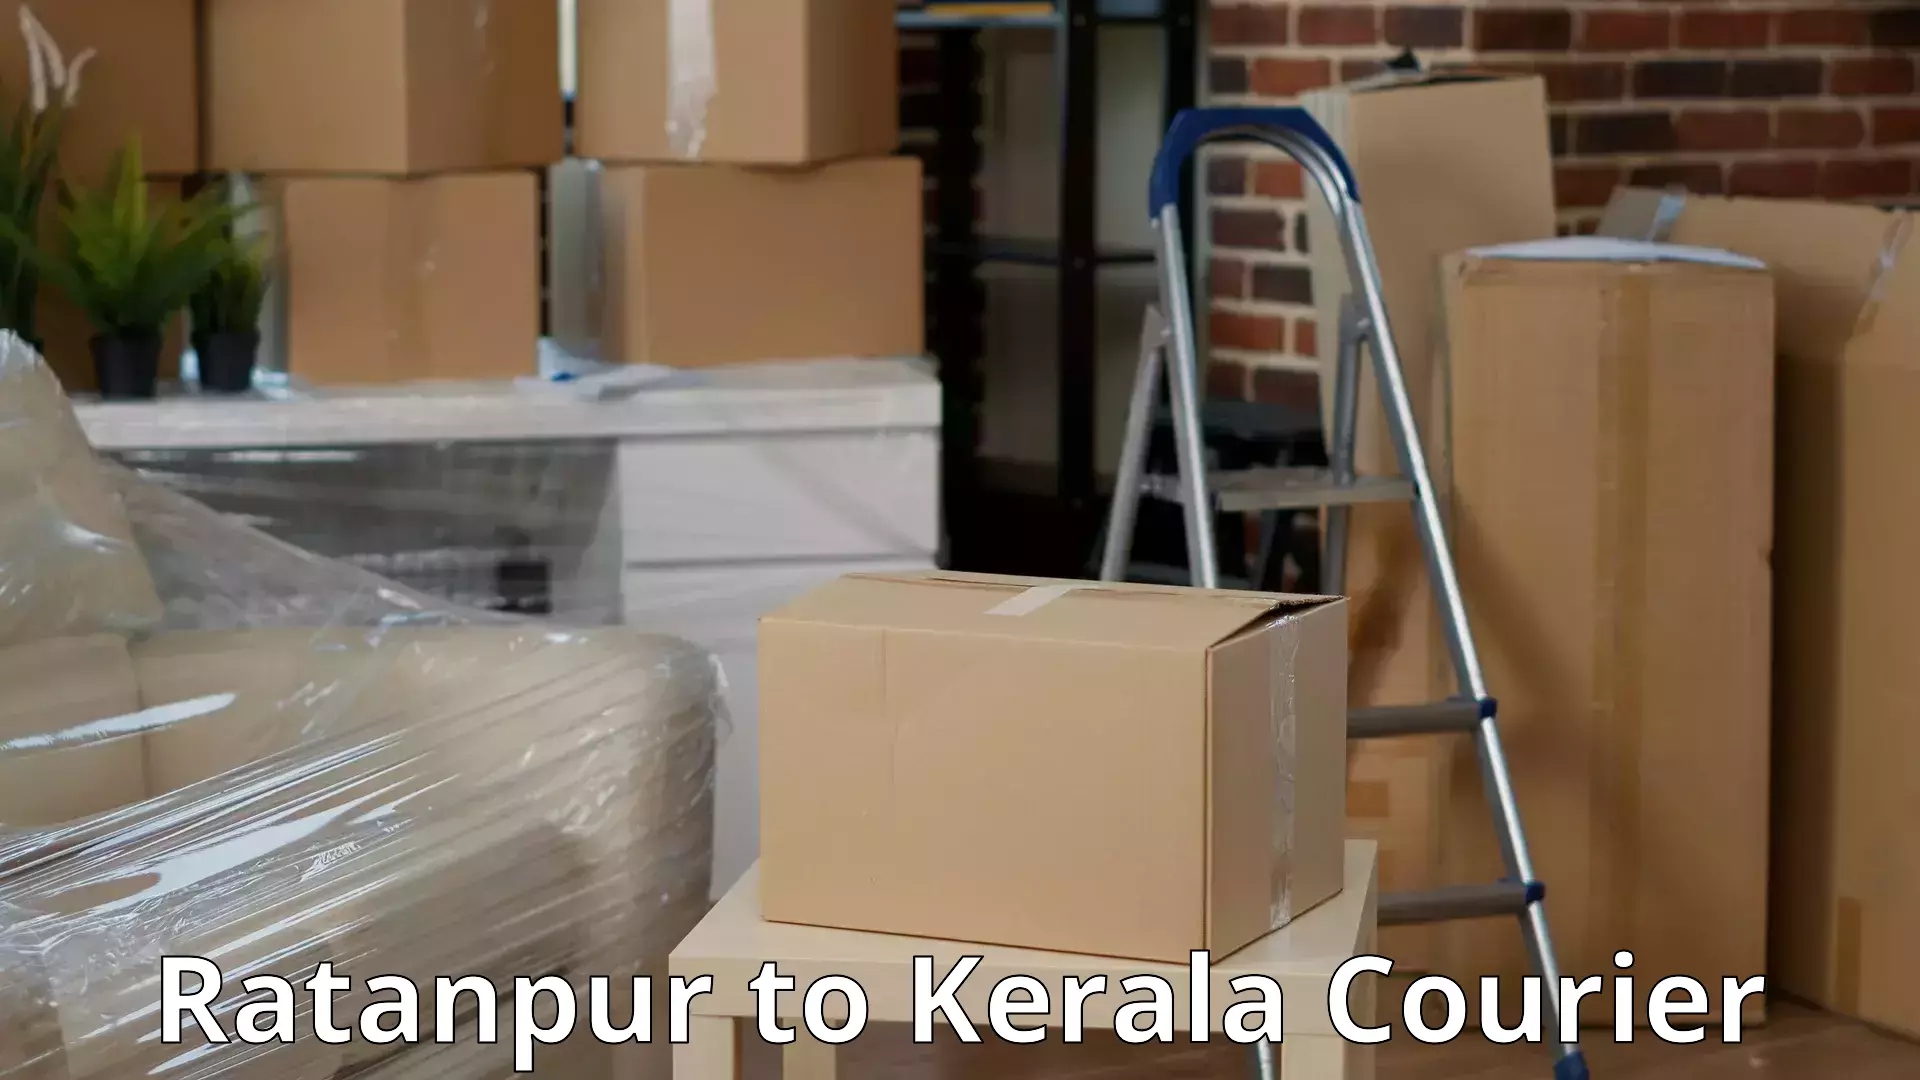 Expert goods movers Ratanpur to Punalur